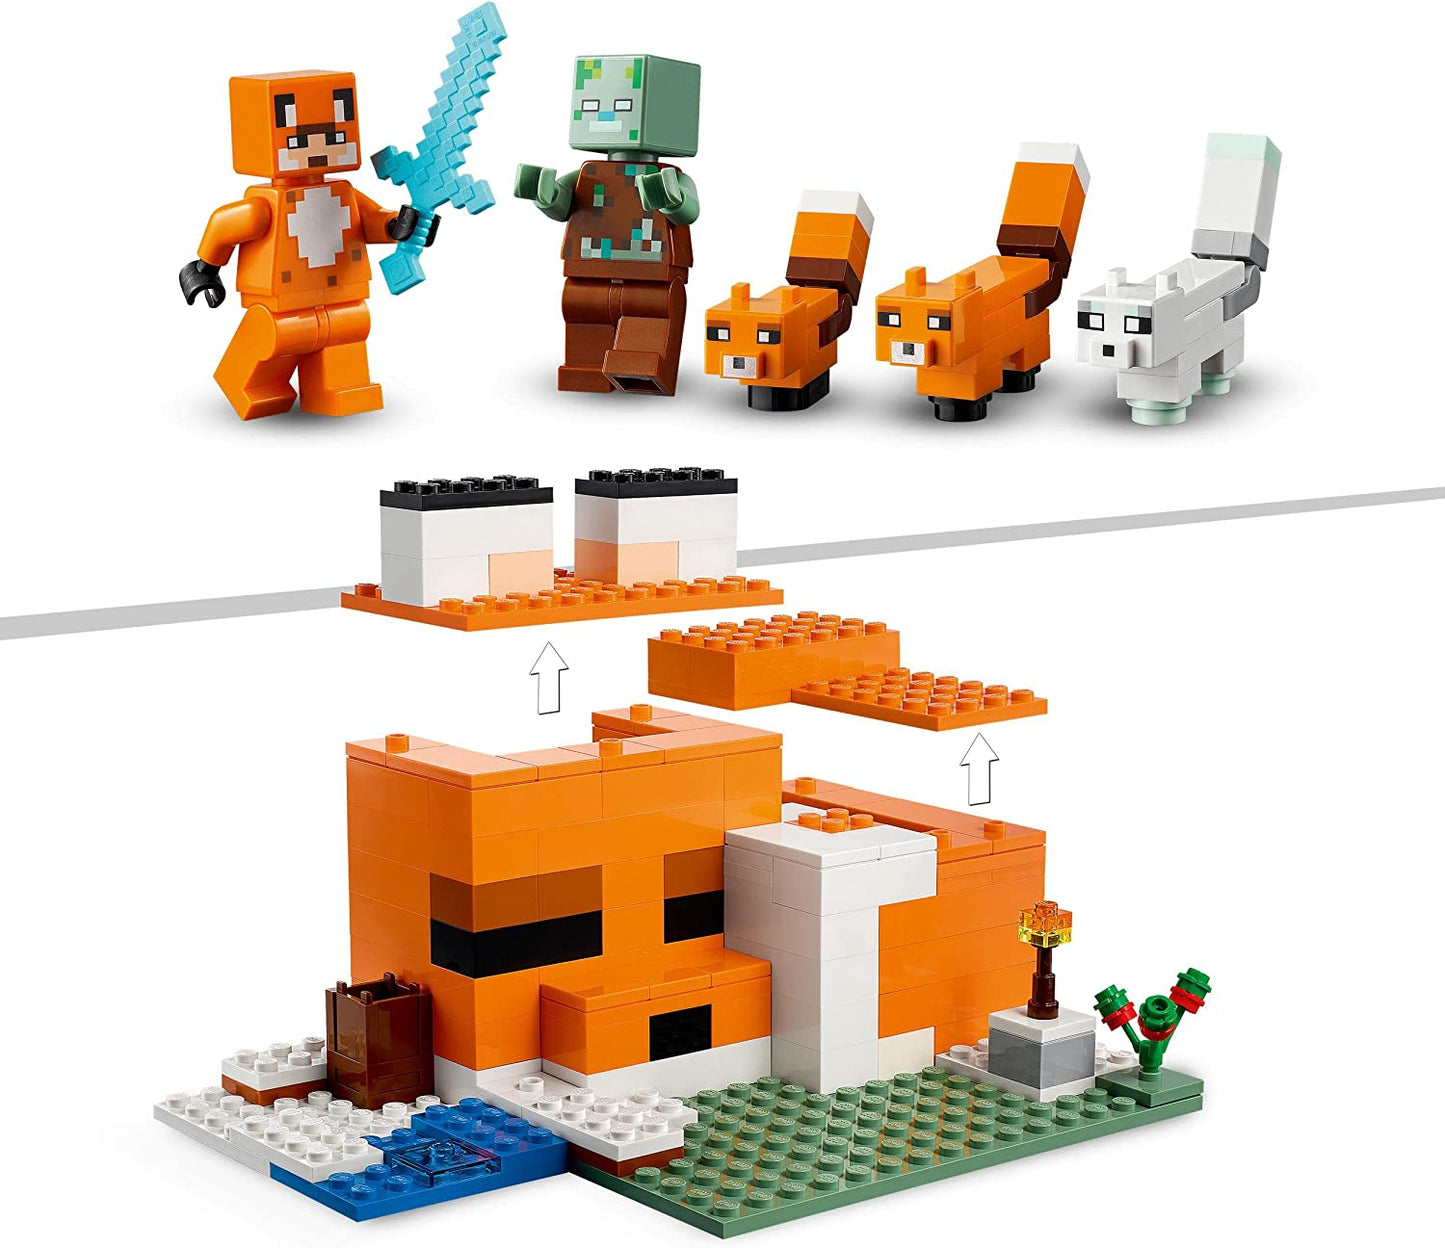 21178 Minecraft the Fox Lodge House, Animal Toys, Birthday Gifts for Kids, Boys and Girls Age 8 plus Years Old, with Drowned Zombie Figure